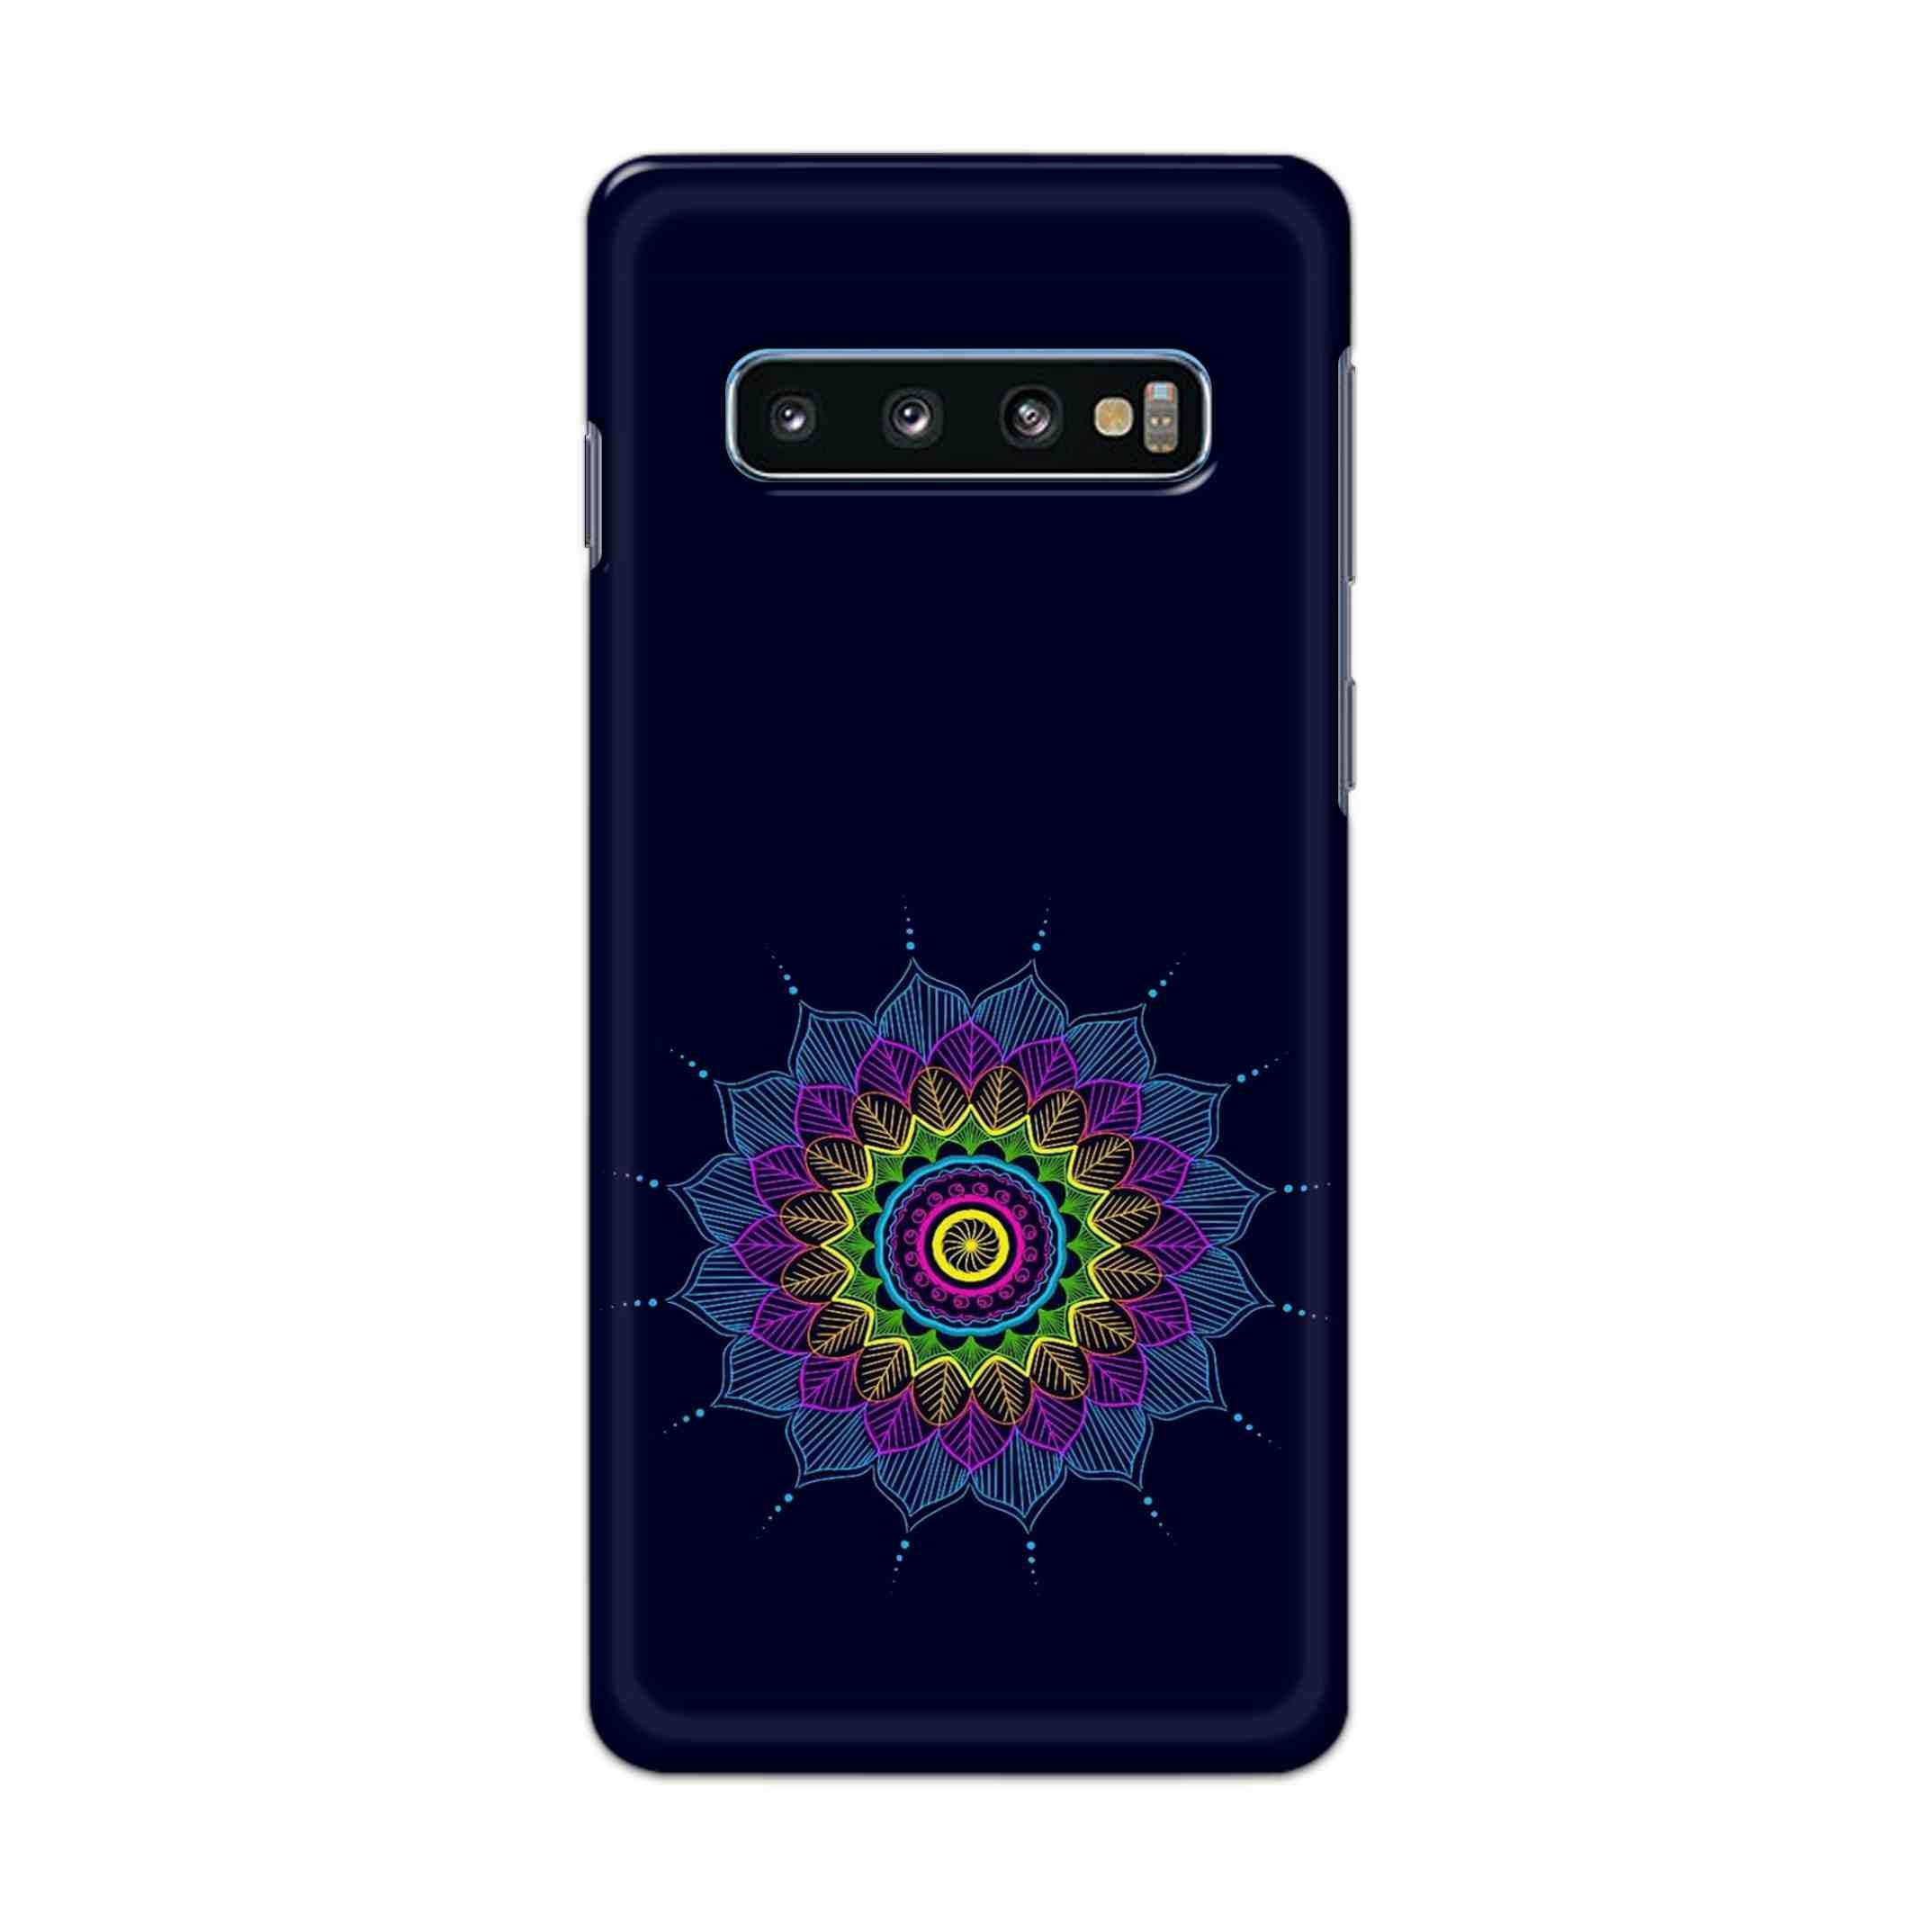 Buy Jung And Mandalas Hard Back Mobile Phone Case Cover For Samsung Galaxy S10 Plus Online